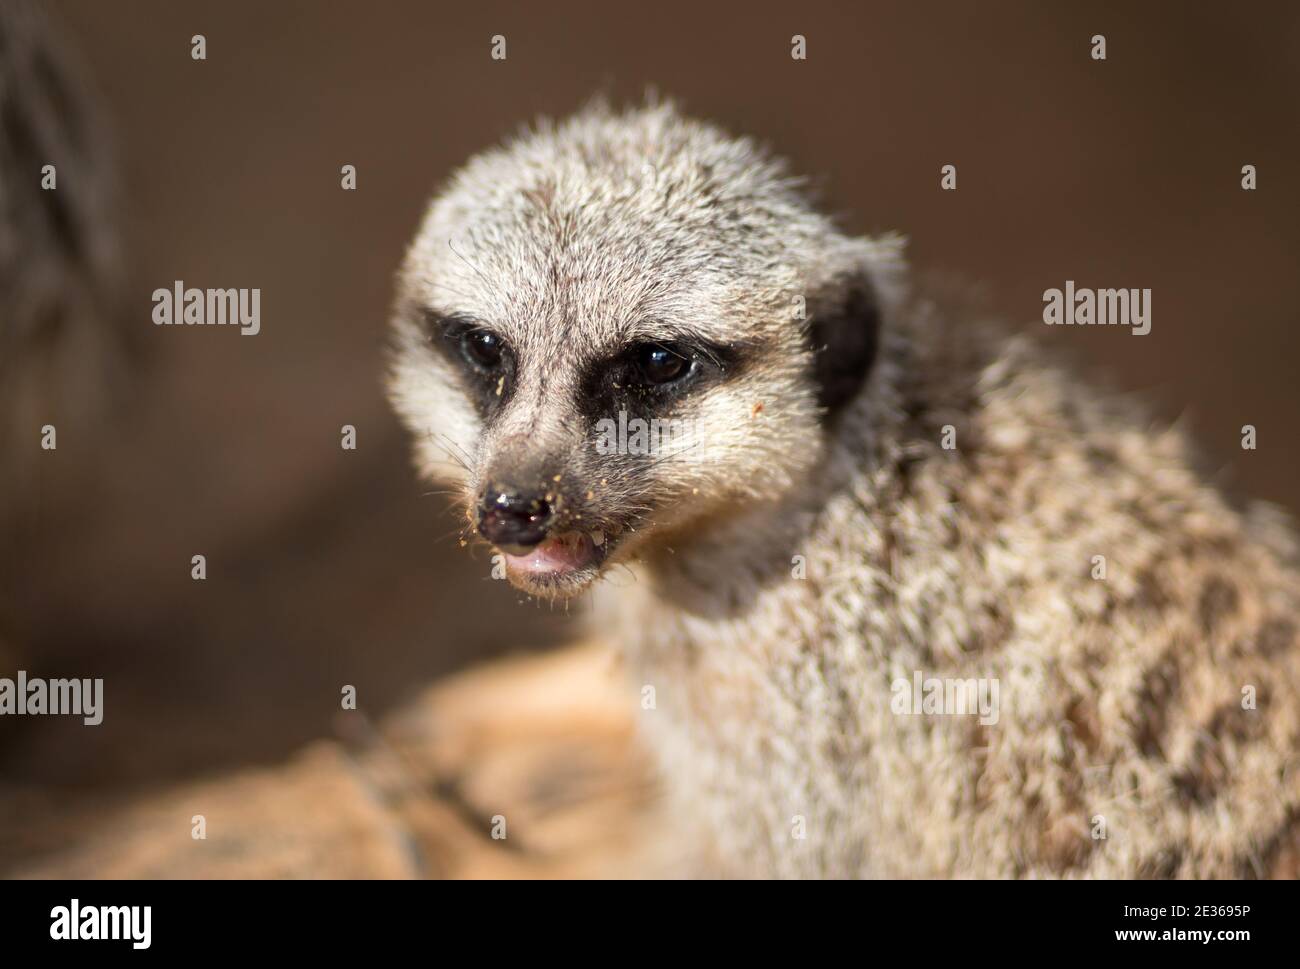 Close-up image of meerkat, blurred background Stock Photo